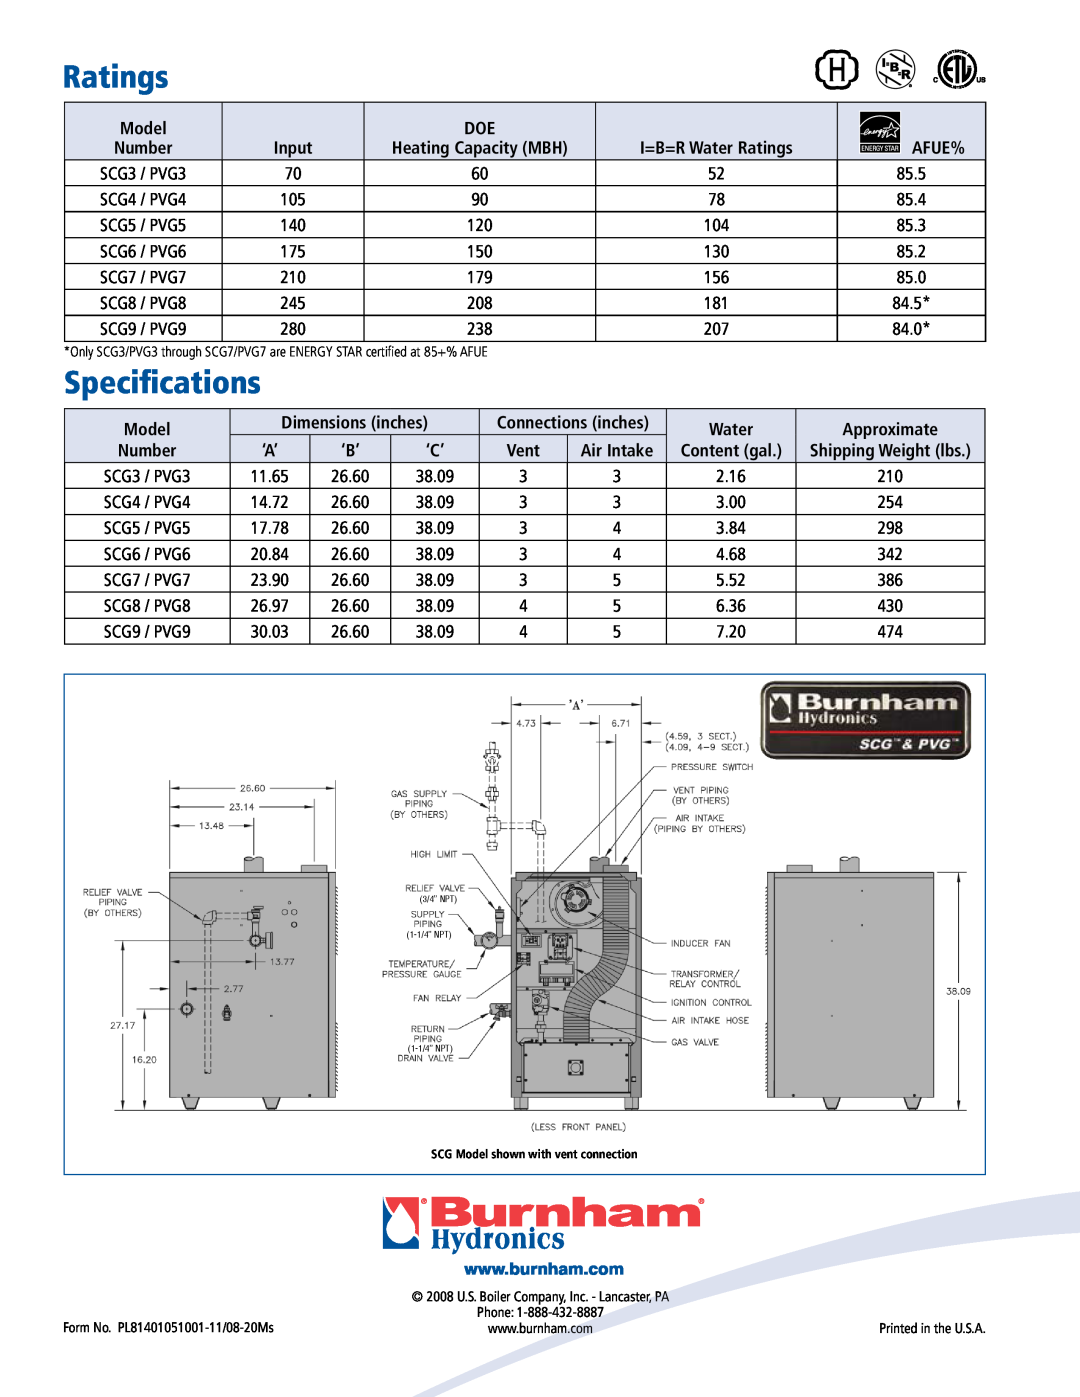 Burnham PVG & SCG Specifications, Input, I=B=R Water Ratings, Afue%, Model, Dimensions inches, Approximate, Air Intake 